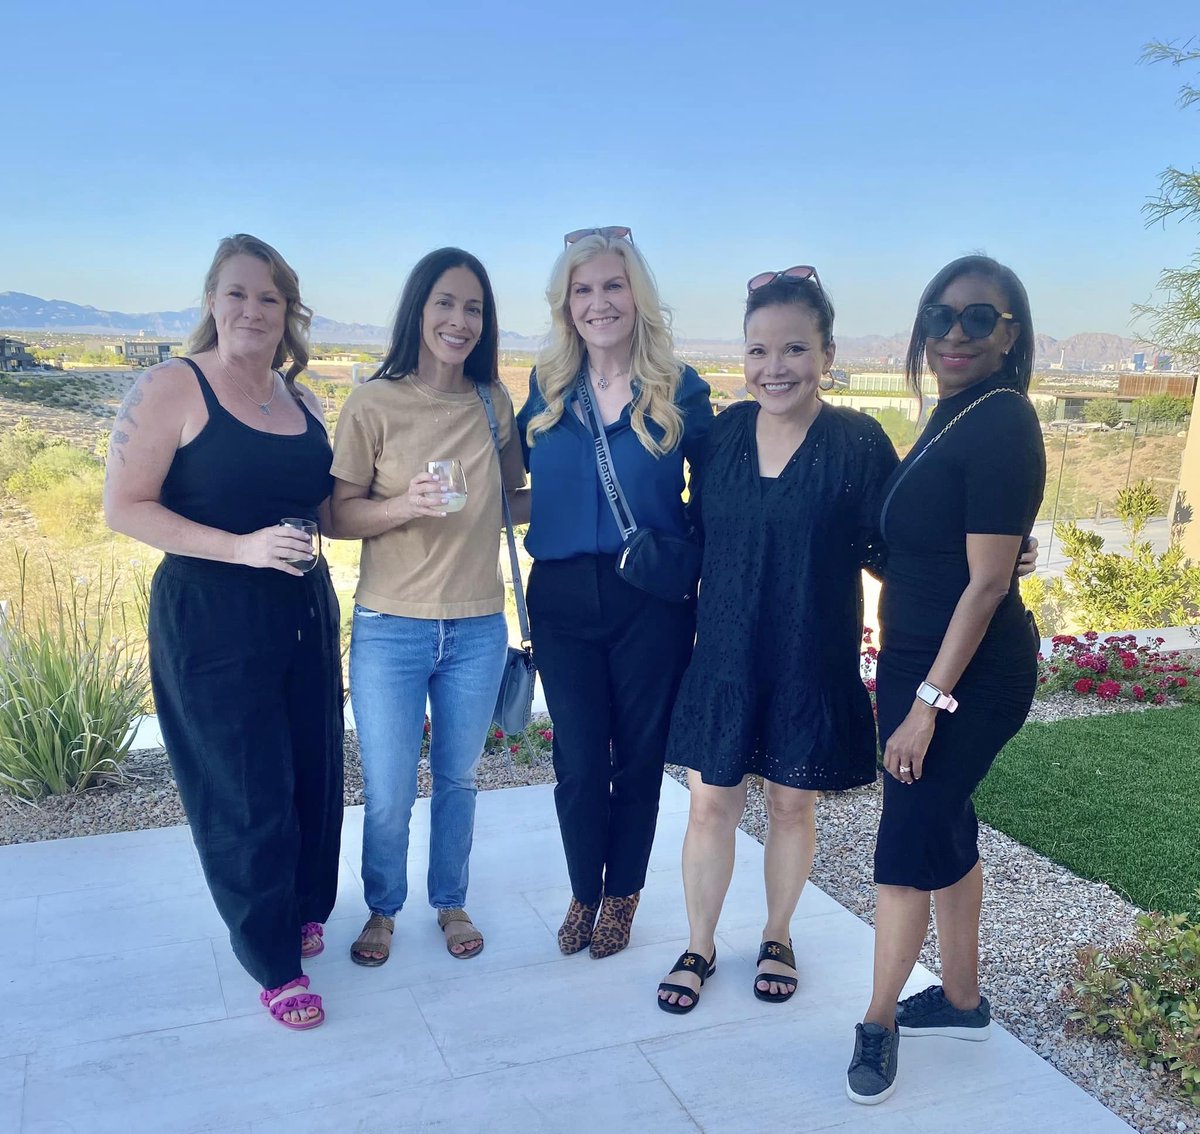 Membership in #JuniorLeague is an opportunity to make lifelong friendships. Last week, the #JLLV Sustainers hosted their monthly wine group and welcomed new Sustainers and Active Advisory Members. We are so grateful for their commitment to #JuniorLeague and to the community!